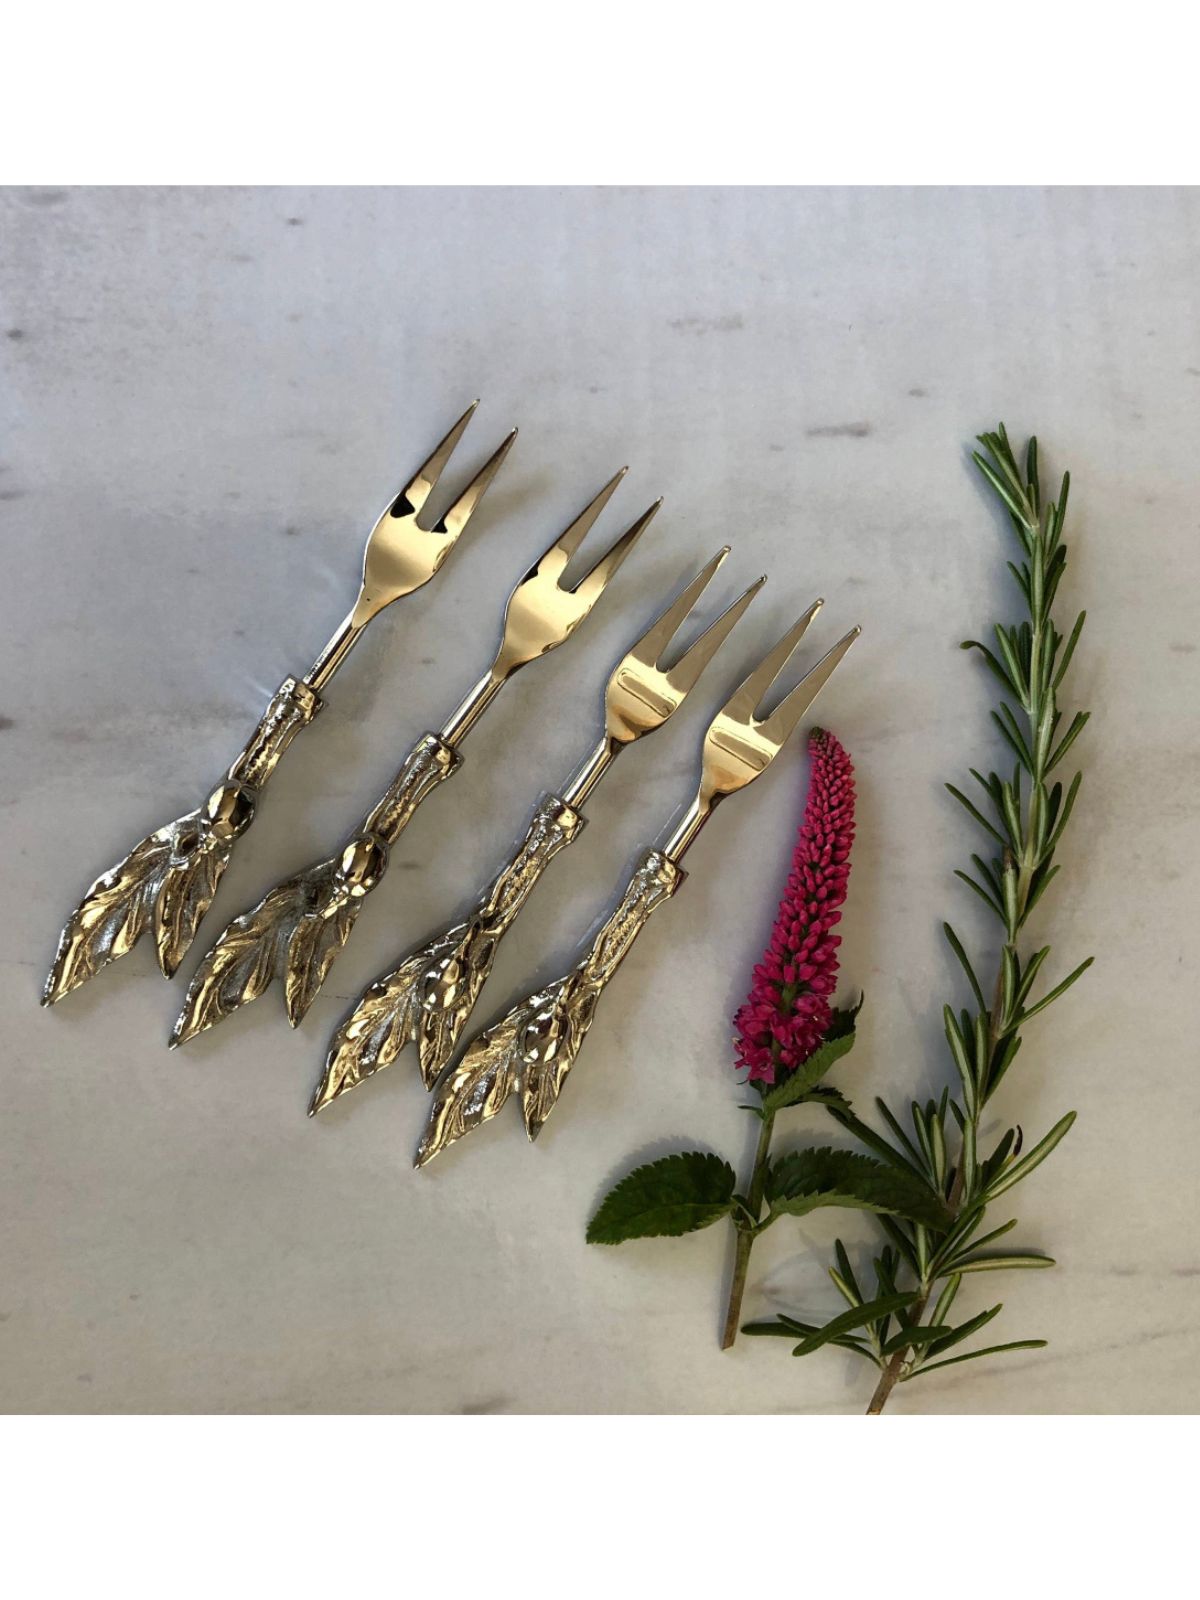 Stainless Steel Forks with Olive Branch Designed Handles Sold by KYA Home Decor.